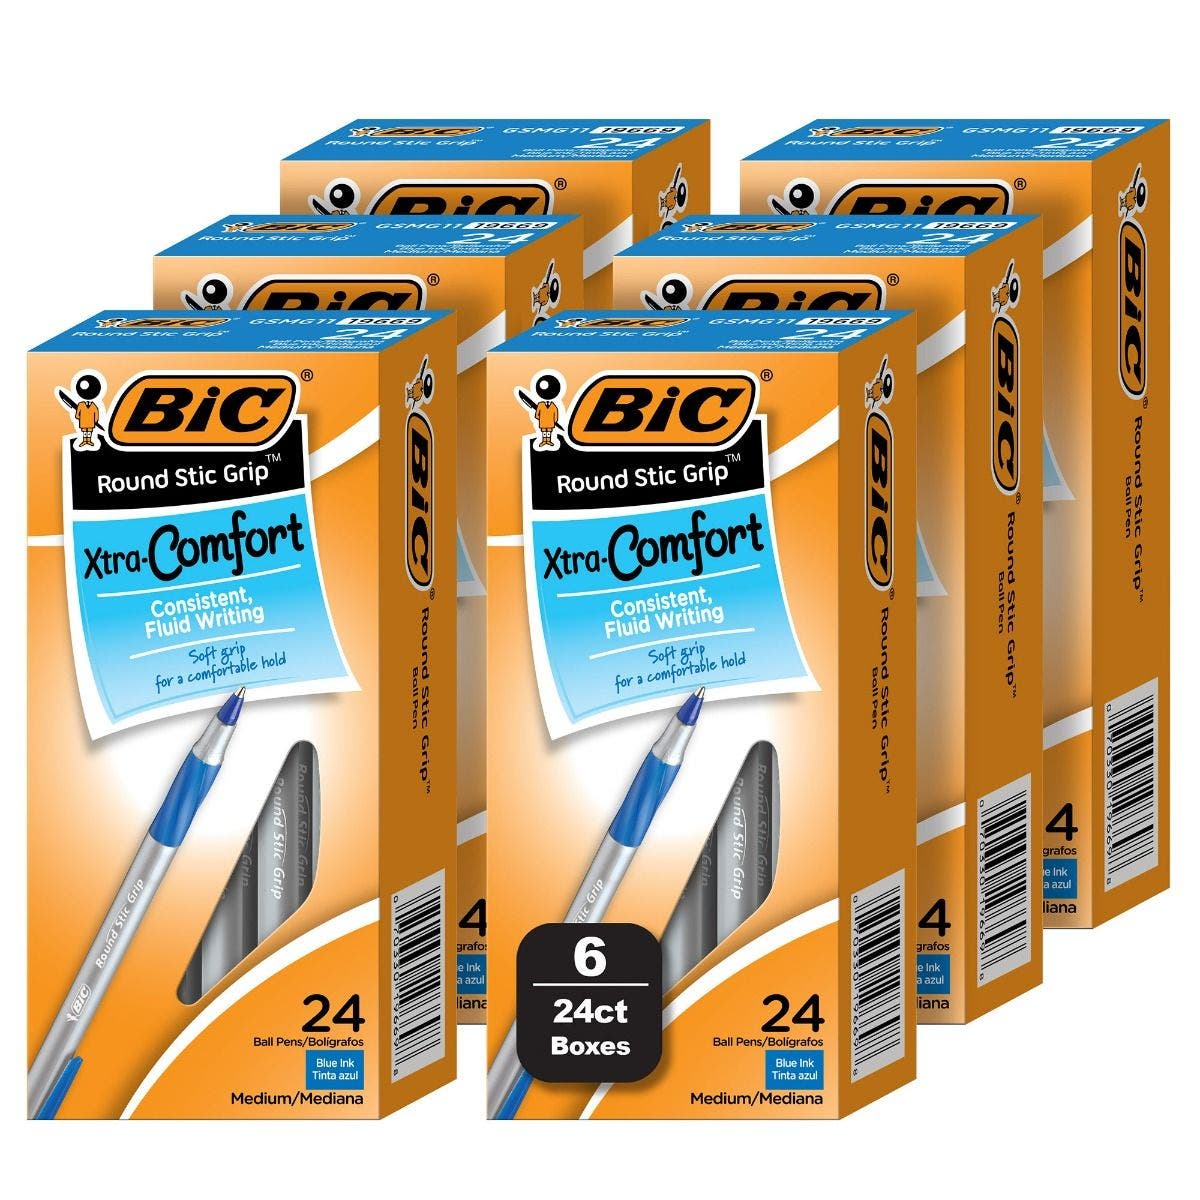 BIC Cristal Soft Ball Pens - Pack of 10 - Blue Colour - Medium Point (1.2  mm) - Smooth Writing and Long-Lasting Ink